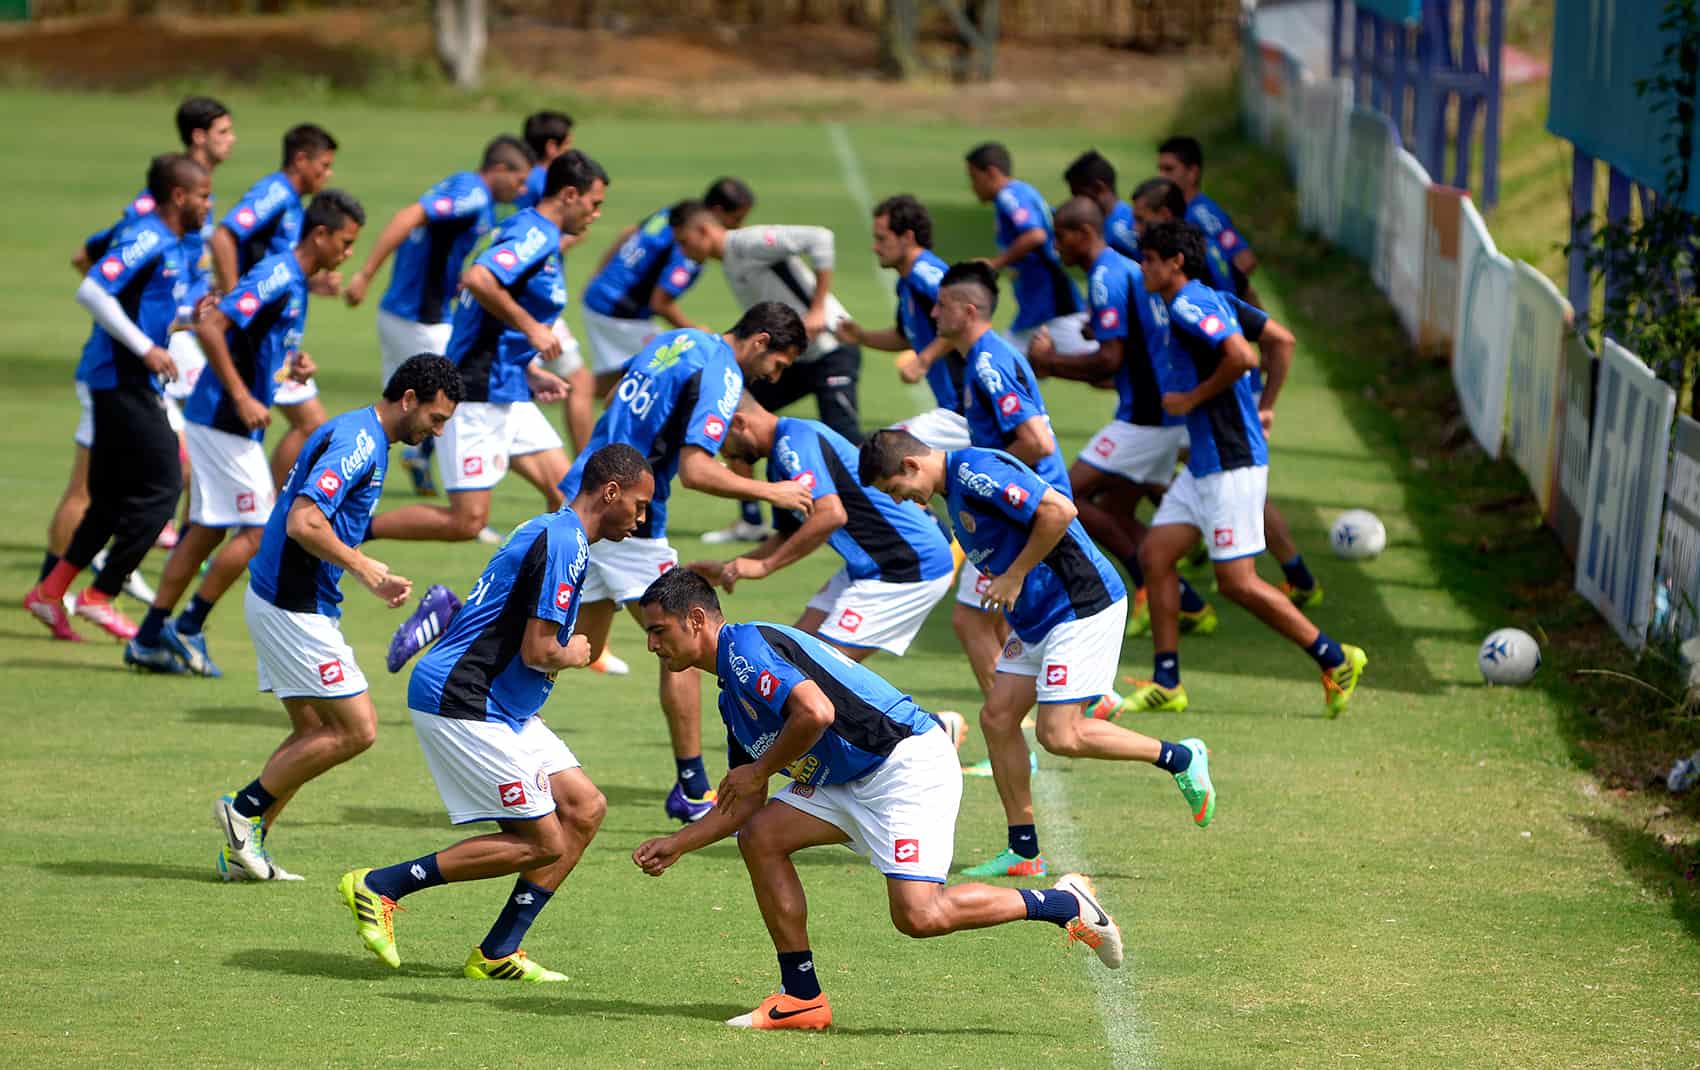 Costa Rica’s ‘La Sele’ begins training for World Cup friendly match